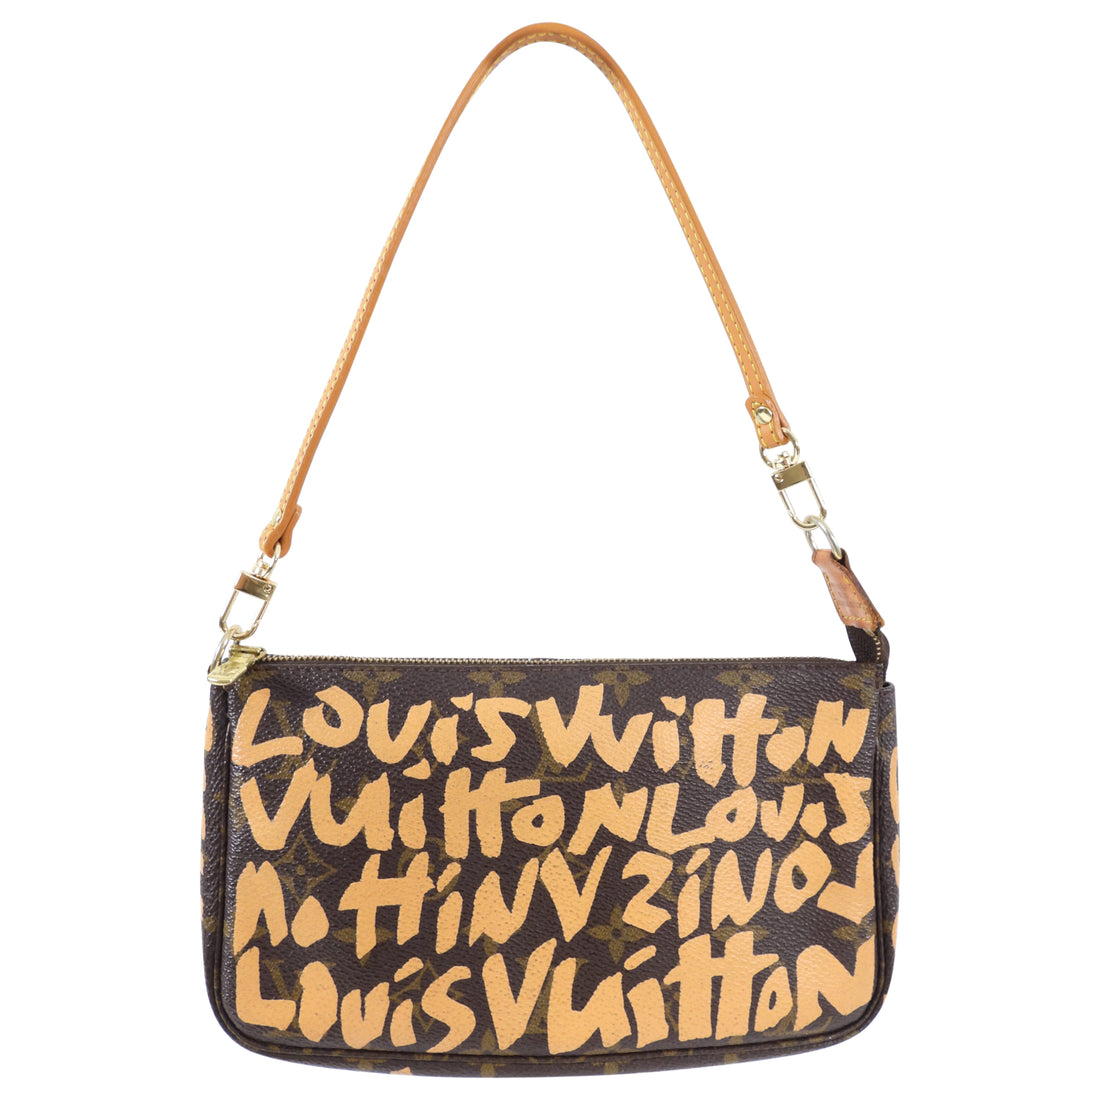 Authentic Louis Vuitton Stephen Sprouse Bag Limited Edition